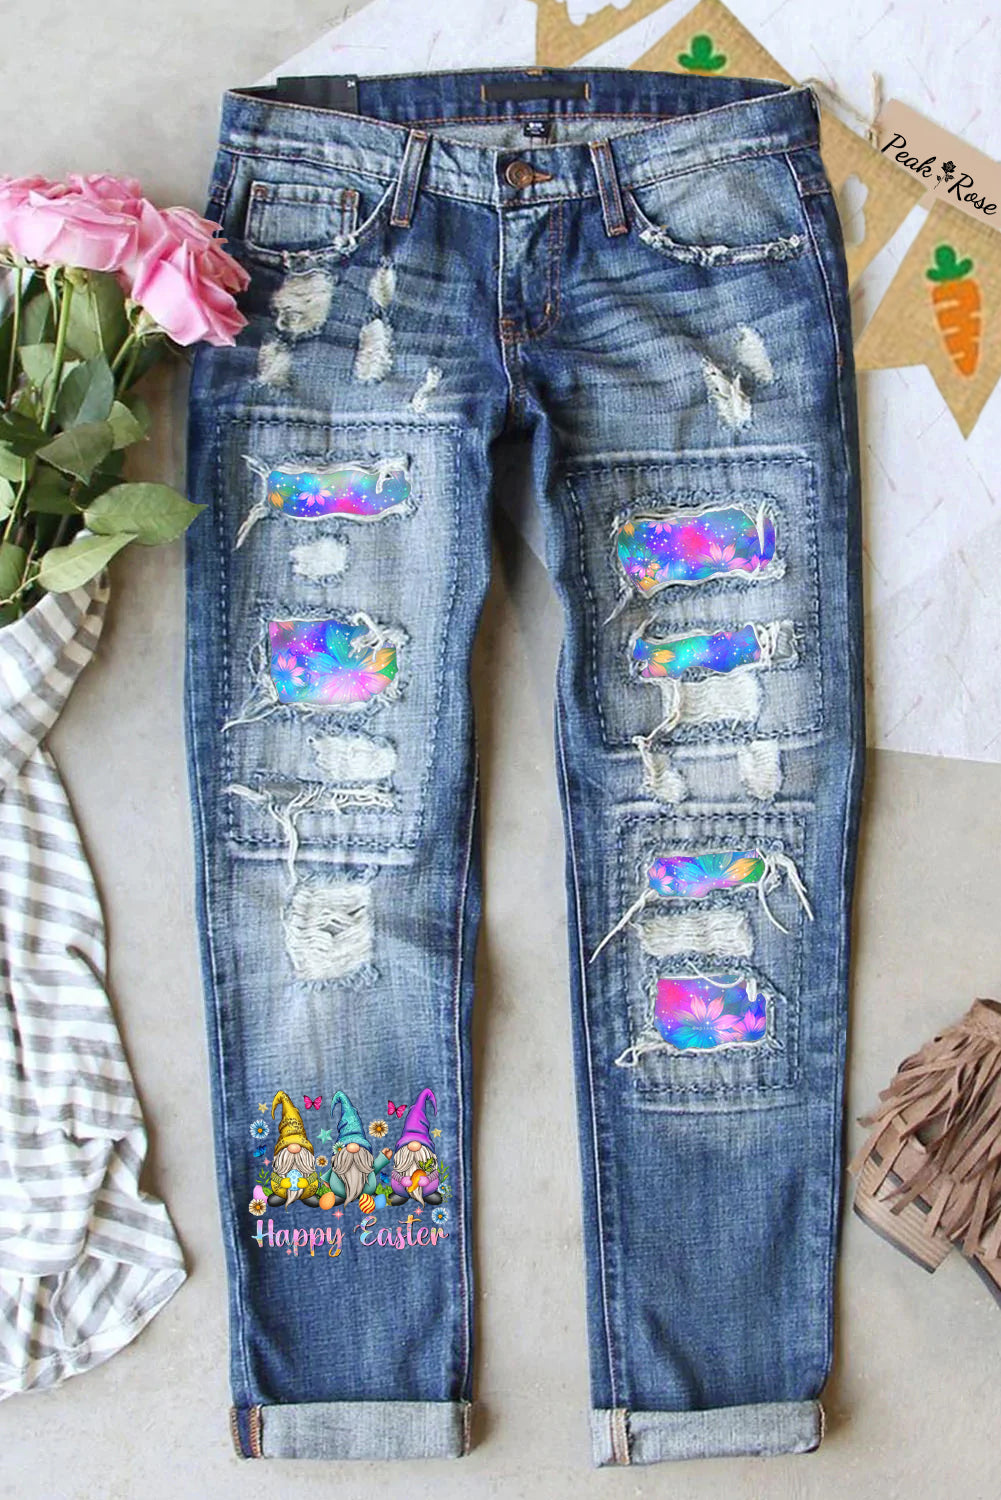 Glitter Sparkle Flowers Galaxy Sky Happy Easter Gnomes With Bunny Ears Printed Denim Jeans